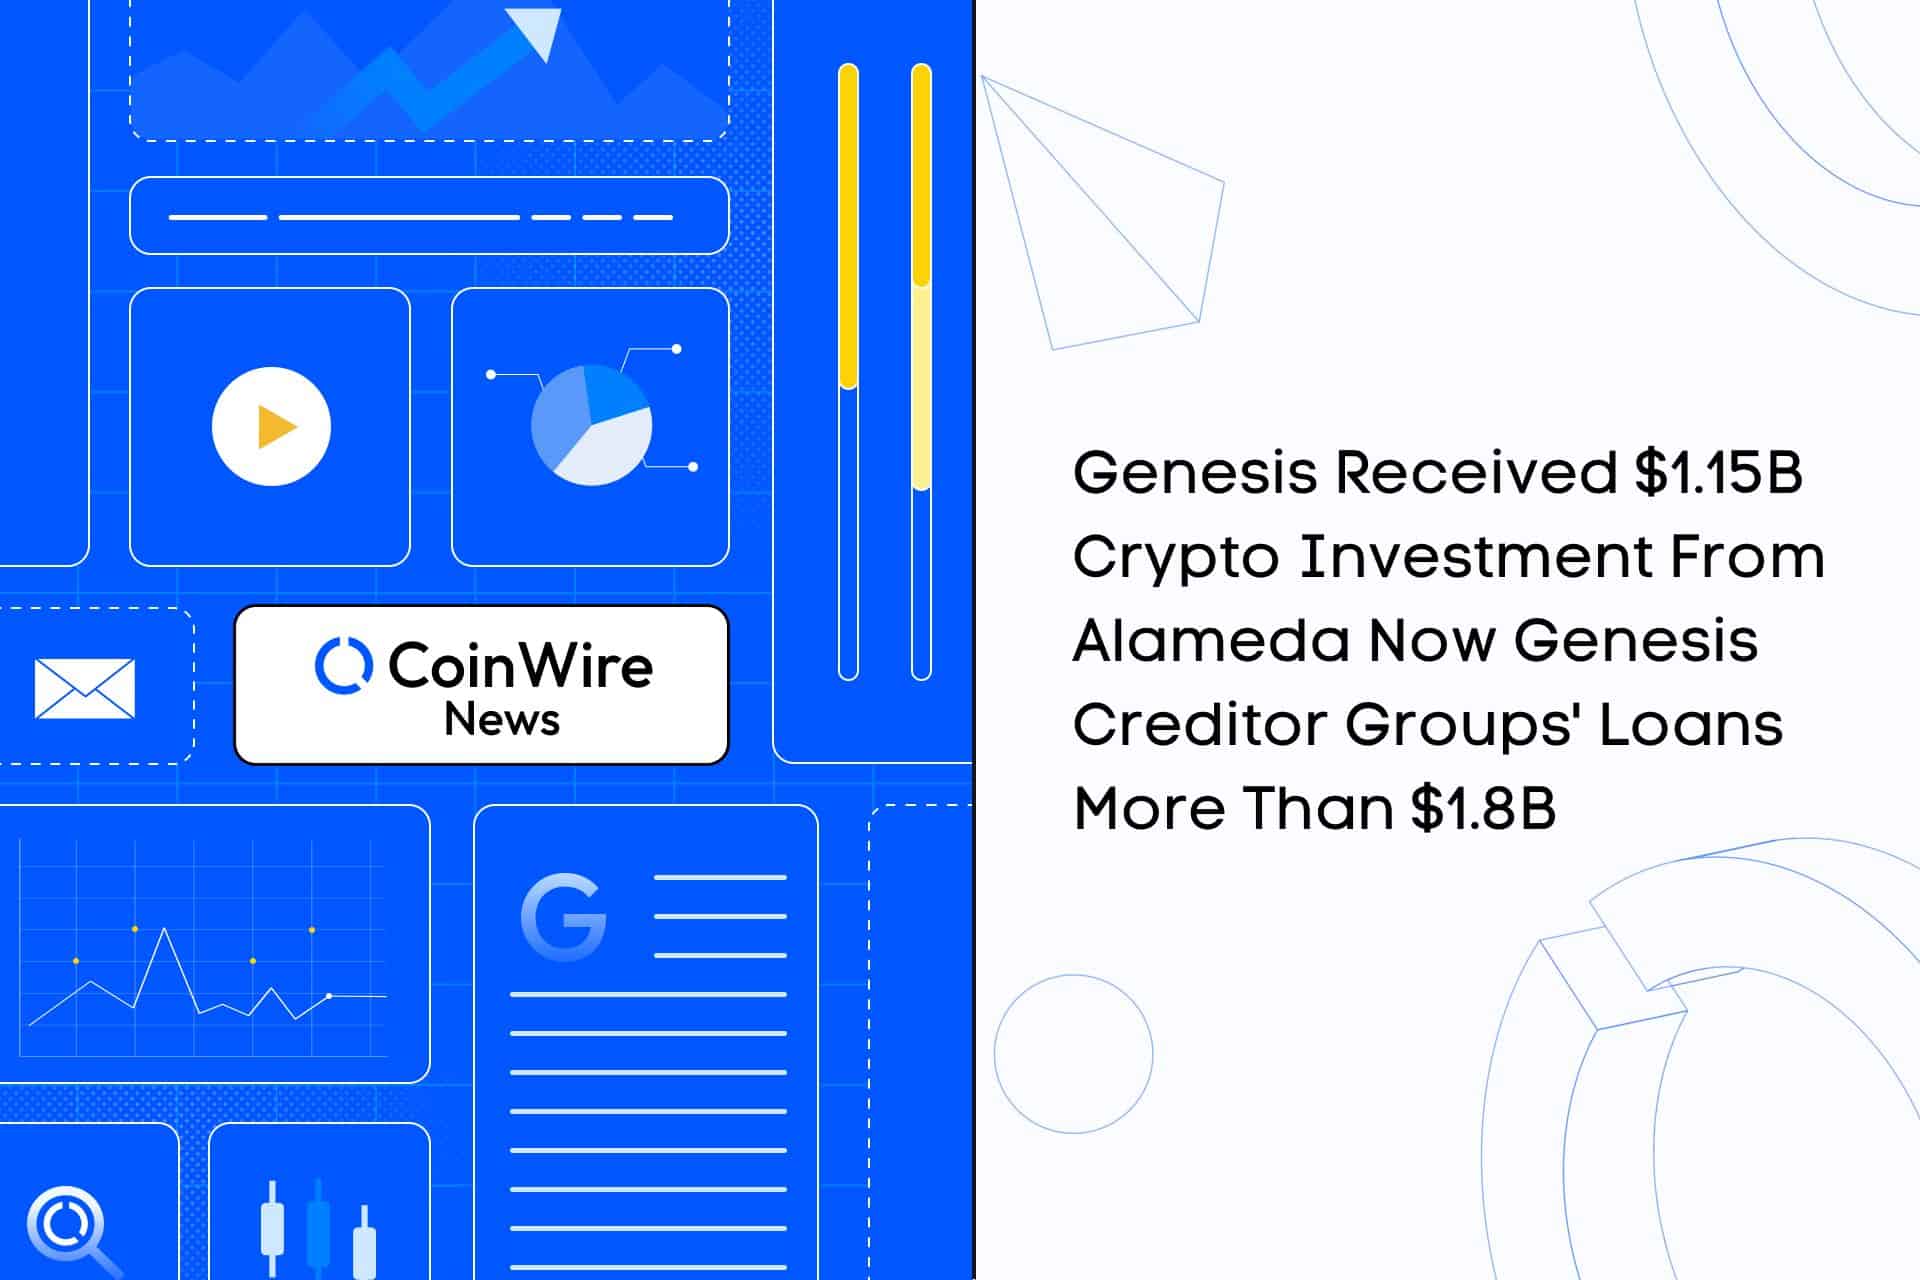 Genesis Received $1.15B Crypto Investment From Alameda Now Genesis Creditor Groups' Loans More Than $1.8B